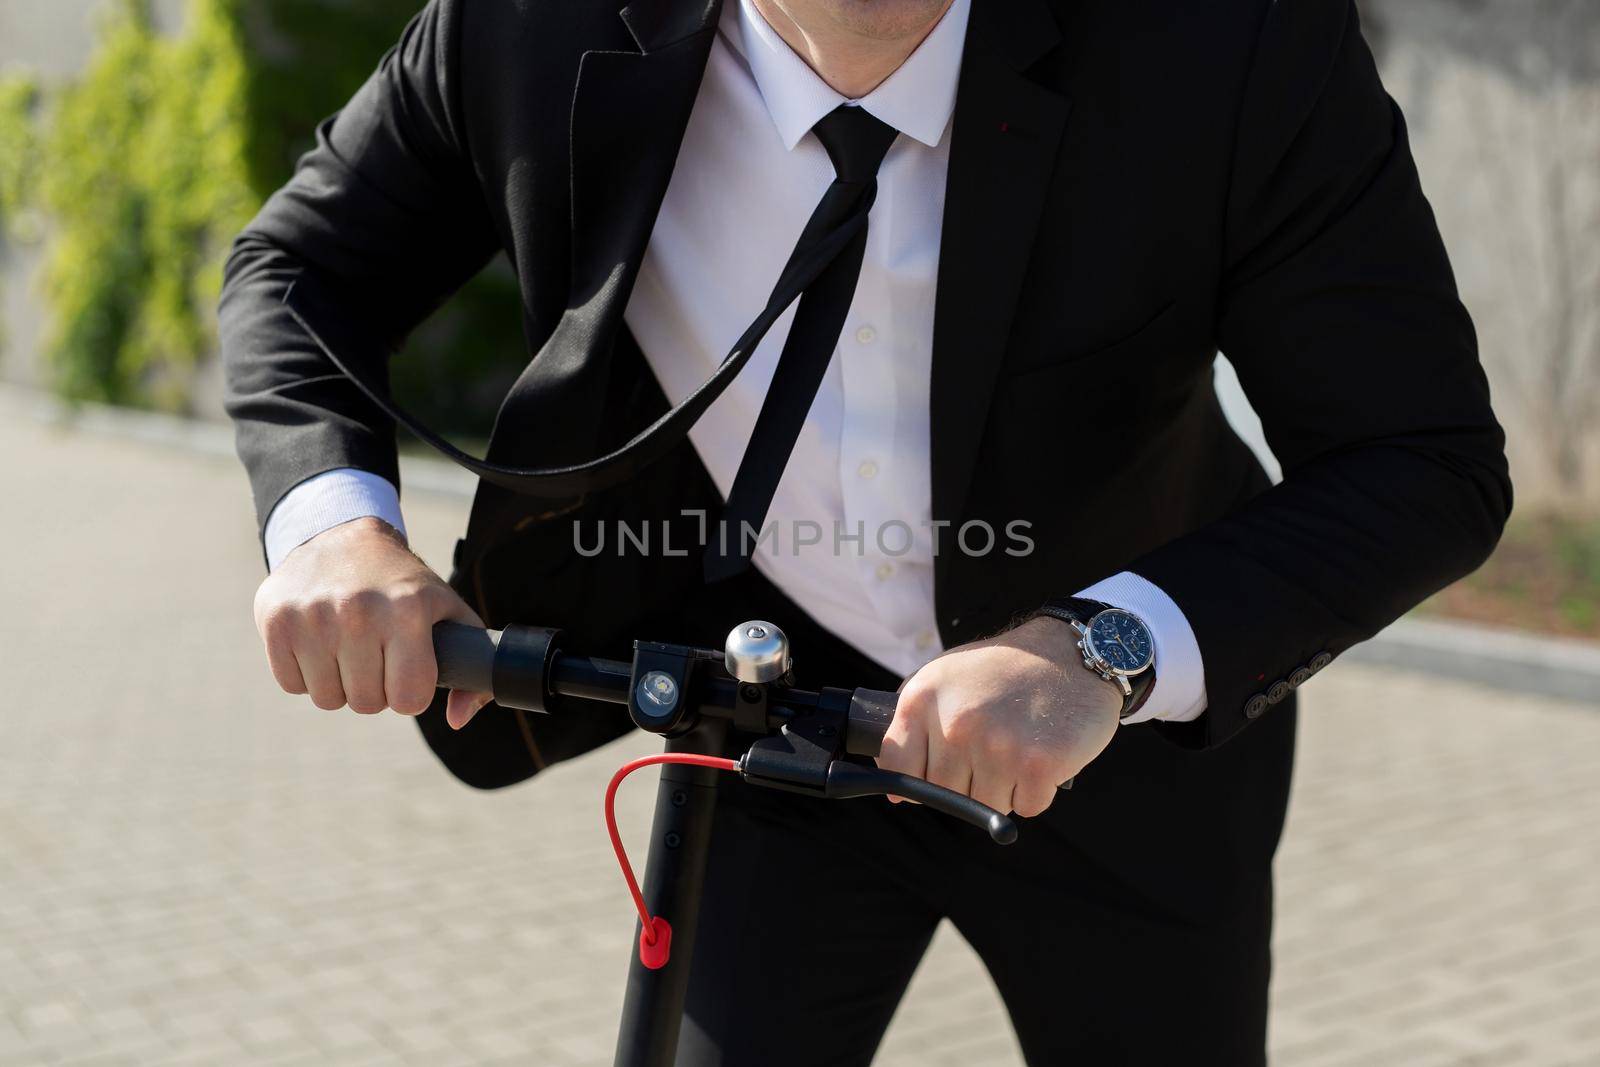 Man in a business suit and sunglasses rides an electric scooter and laughs by StudioPeace